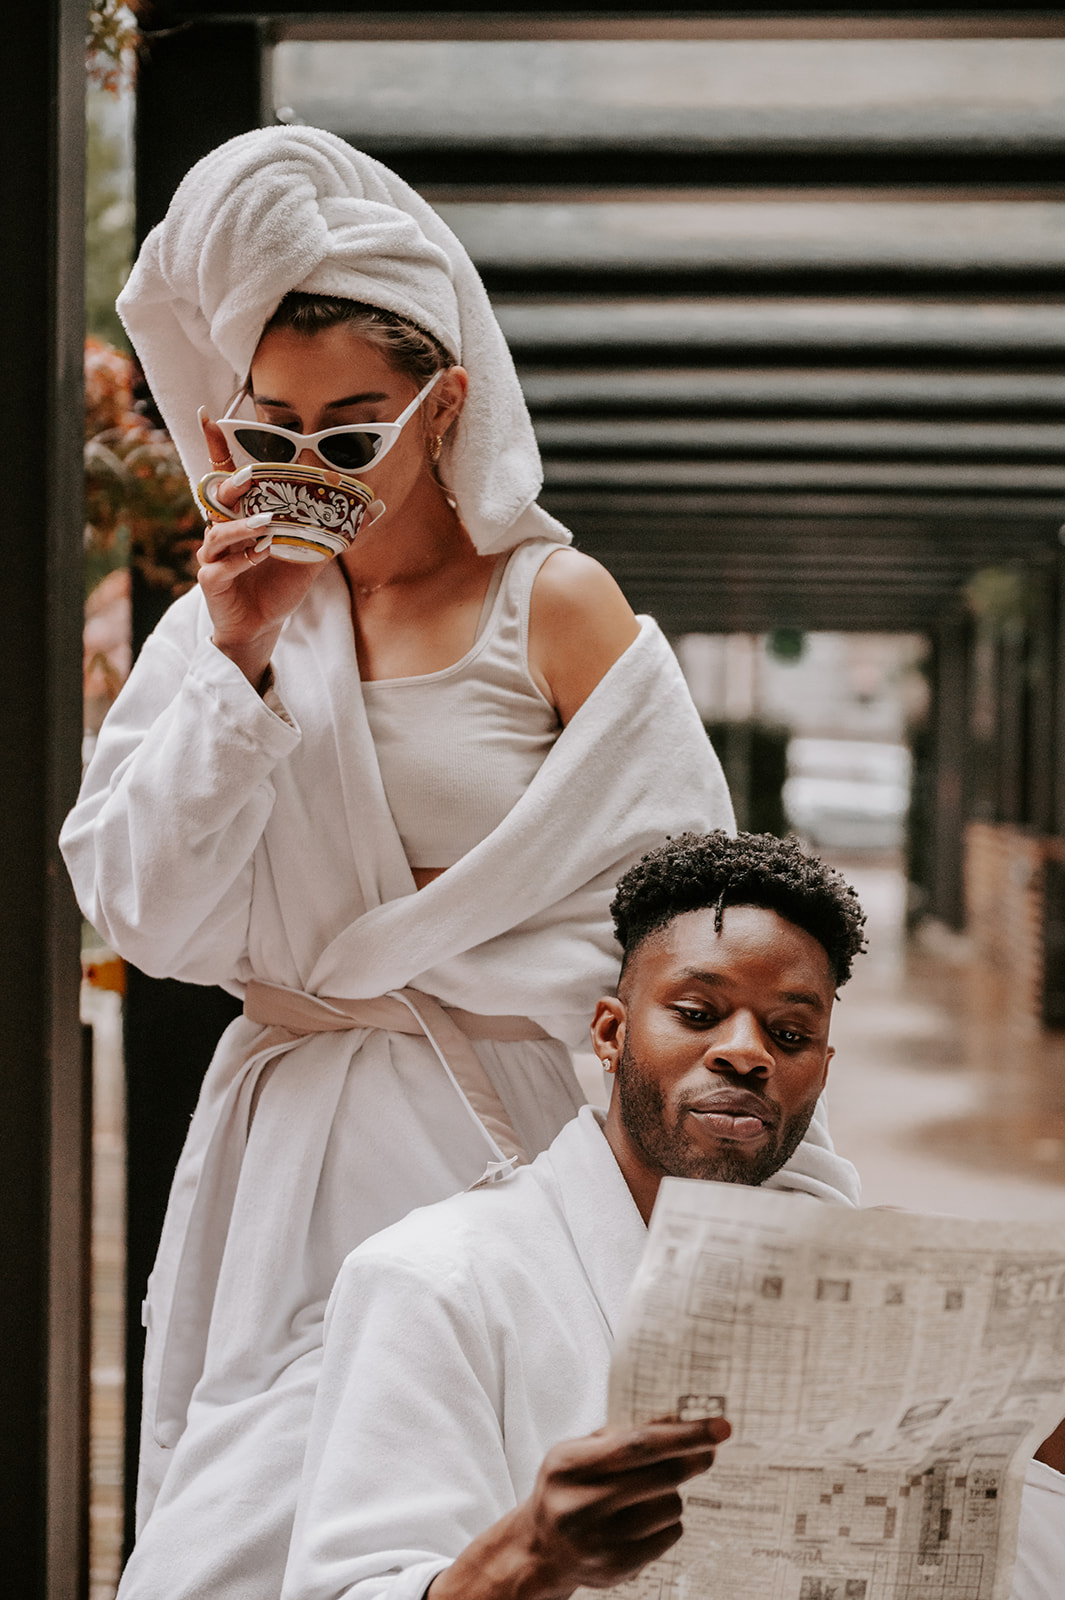 Couple embracing and reading the paper together. Wearing robes and she has a towel on her head and white sunglasses